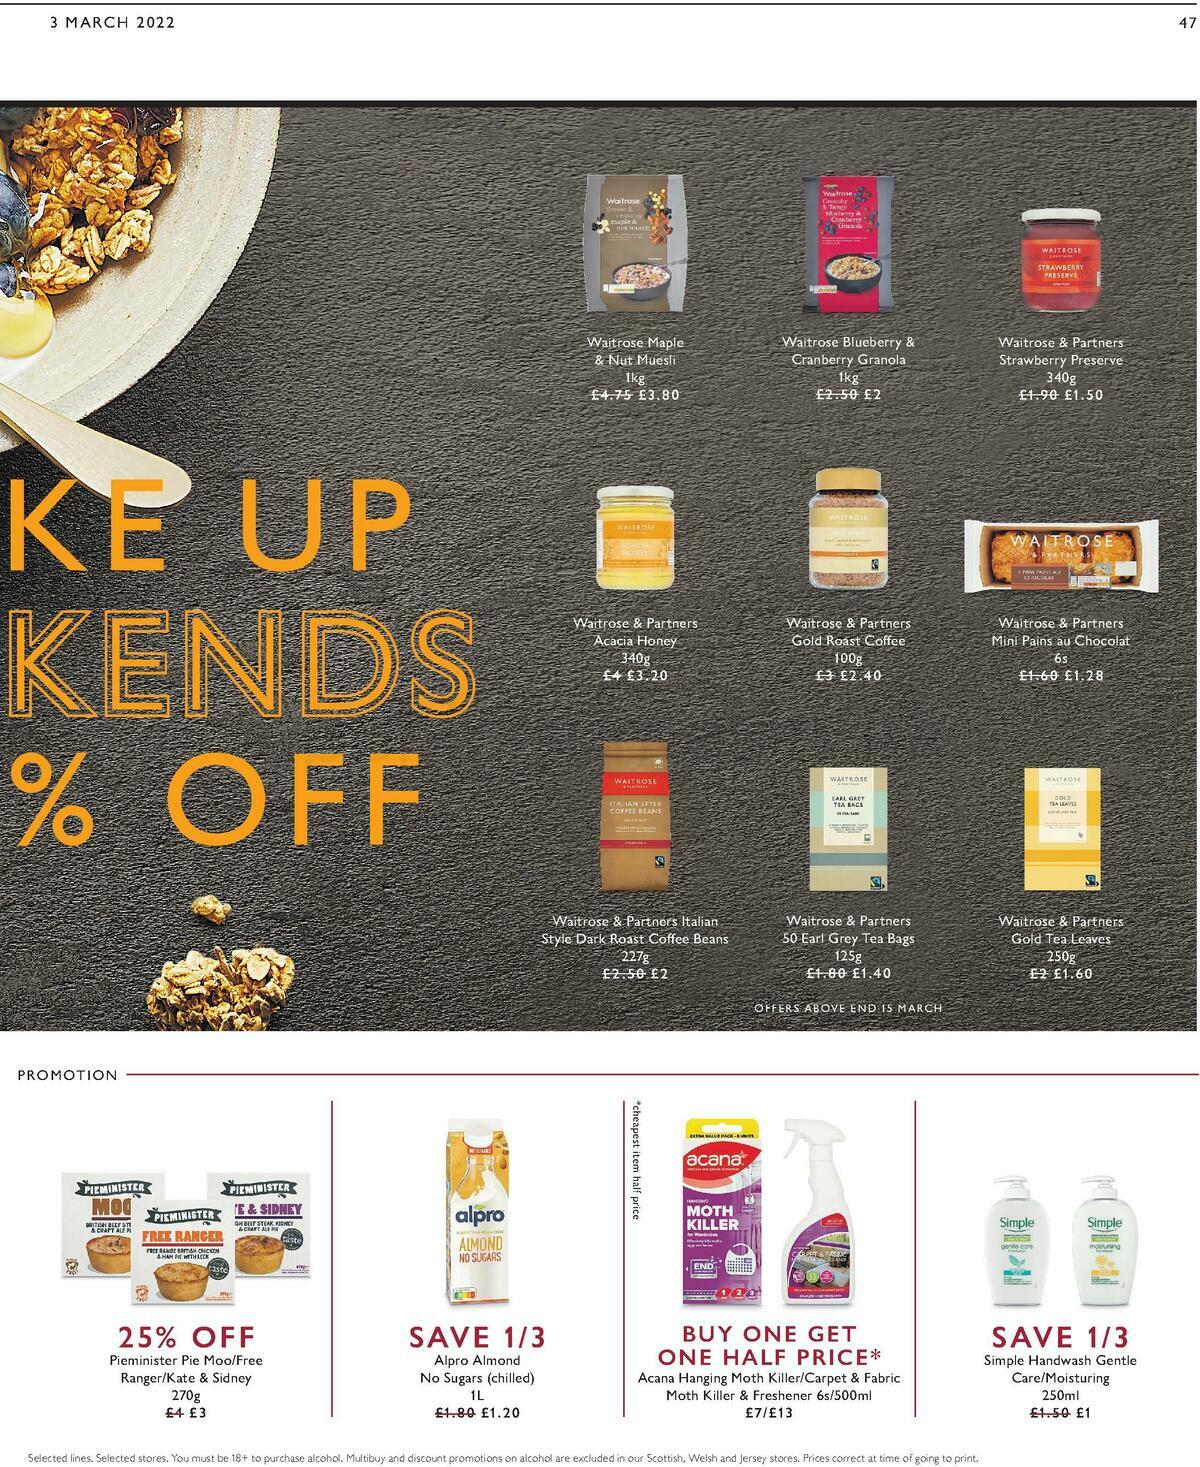 Waitrose Offers from 3 March